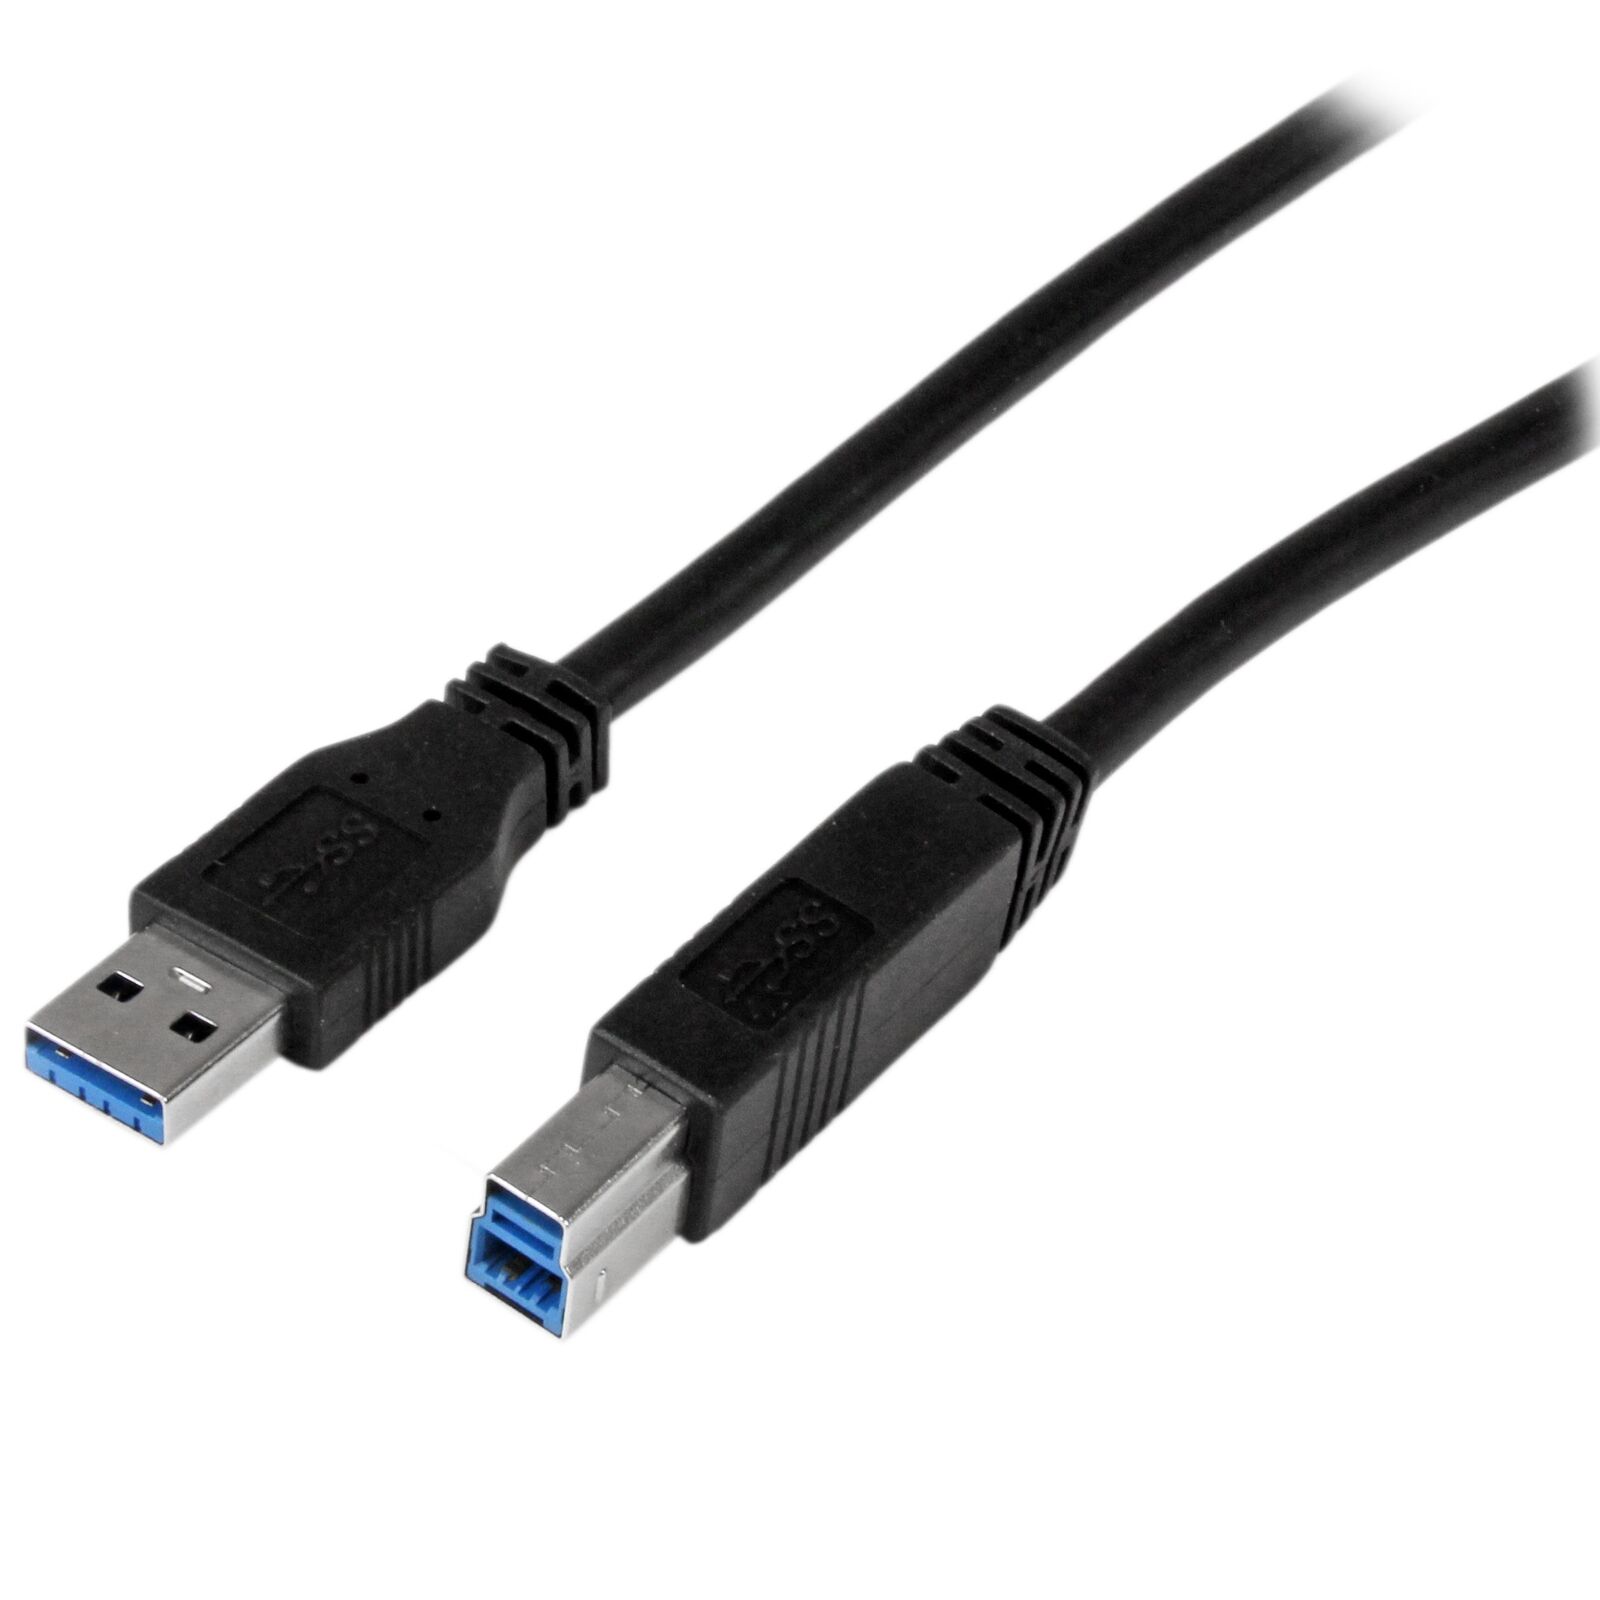 StarTech.com 1m 3 ft Certified SuperSpeed USB 3.0 A to B Cable Cord - USB 3 Cabl